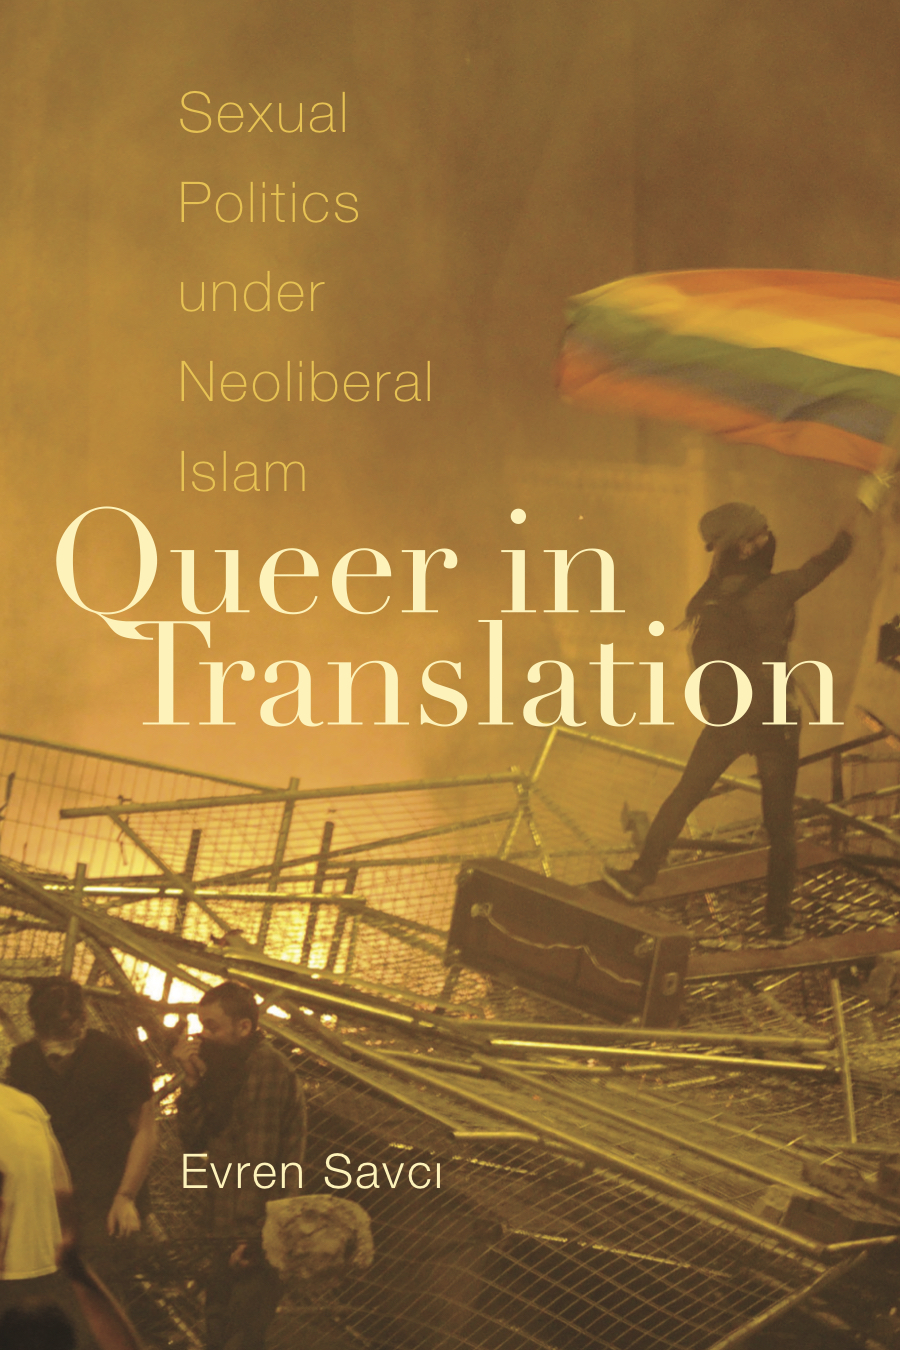 Queer in translation book